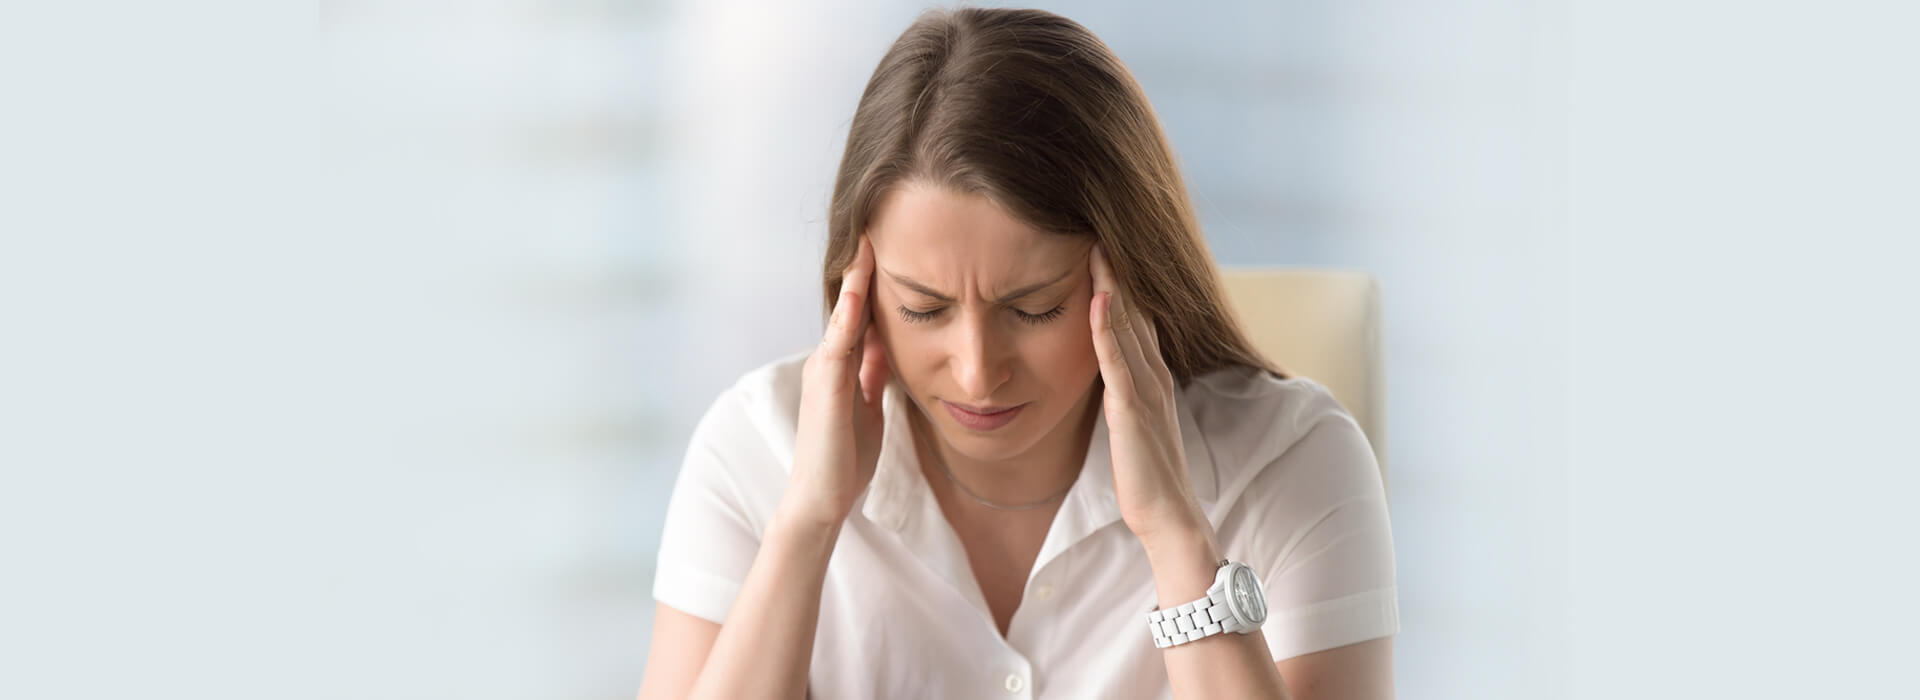 Understanding Migraine: Do You Have These Symptoms?